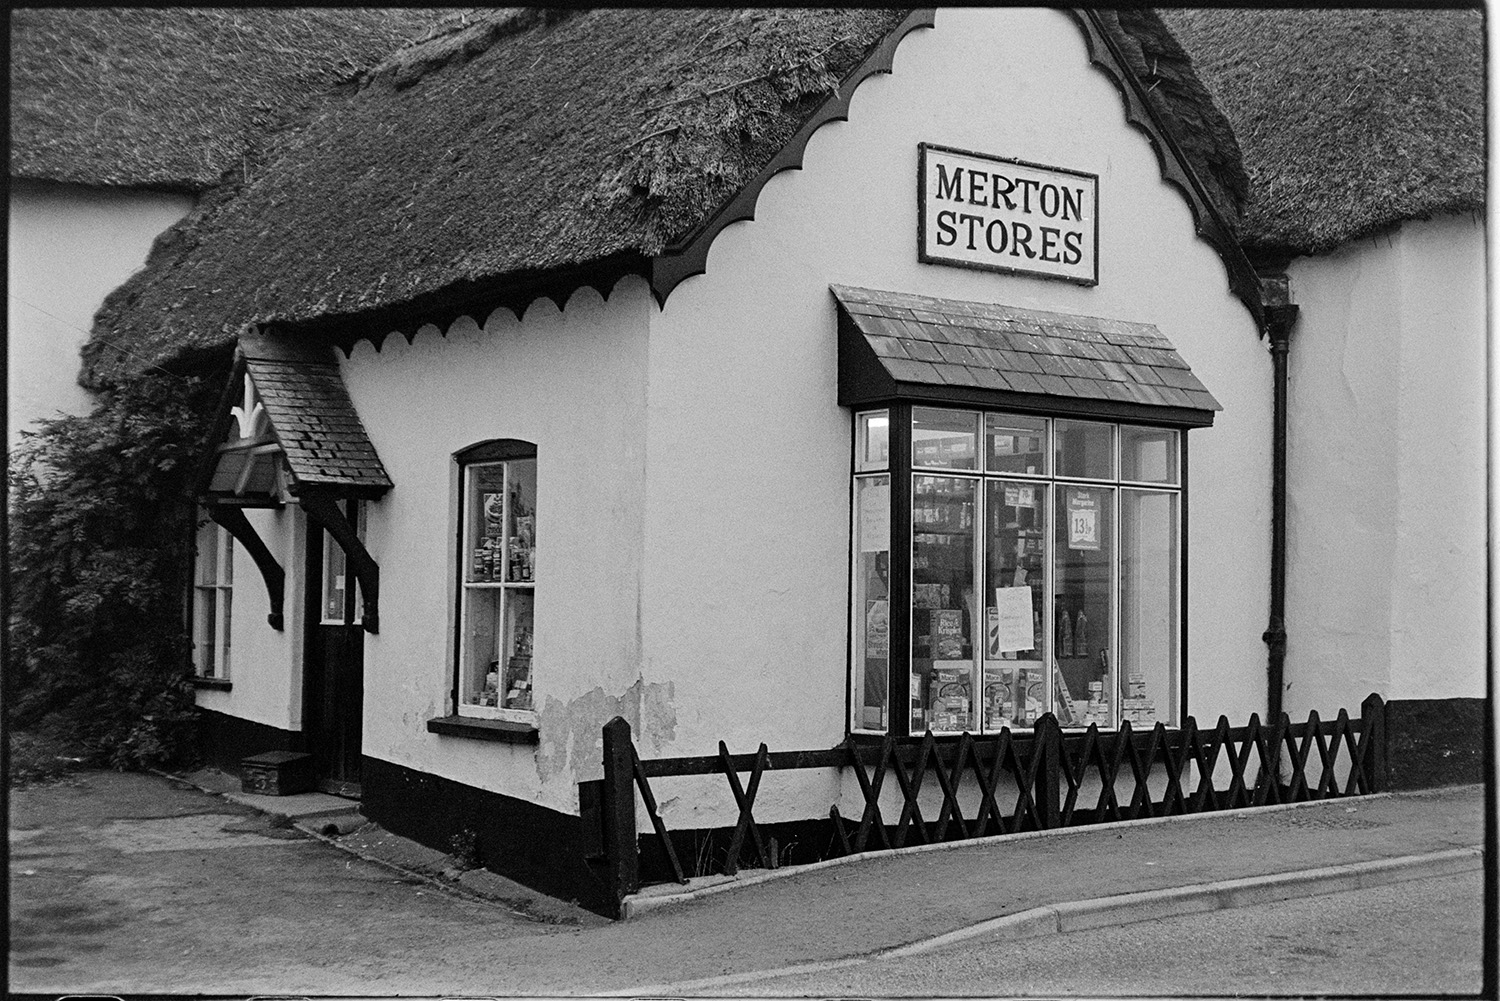 Front of village stores, shop. 
[The shop front of Merton Stores. The roof is thatched and a small porch is over the doorway. Goods are displayed in the window.]